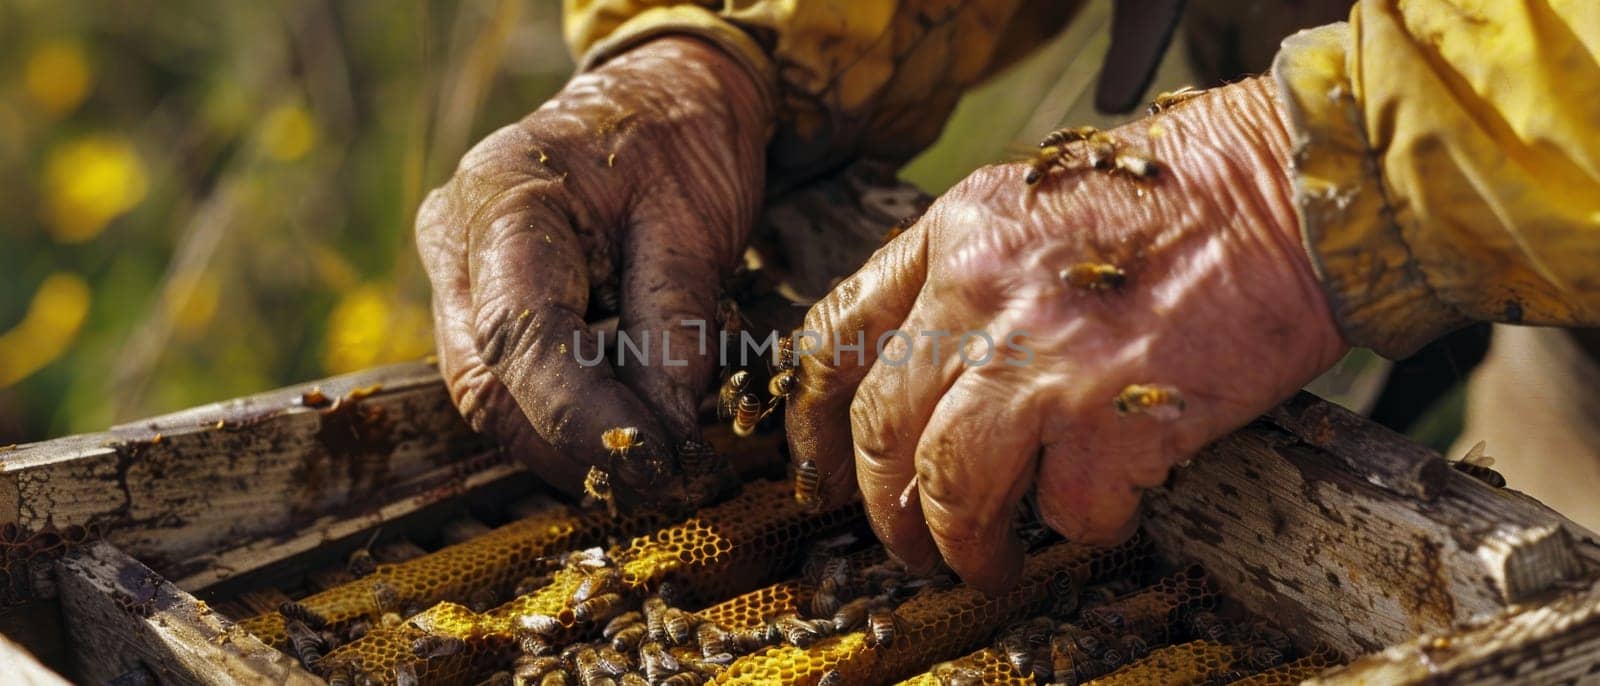 A beekeeper gently tends to bee hives in a lush environment, his gloves covered in pollen and propolis. His dedication to the craft shines through the image